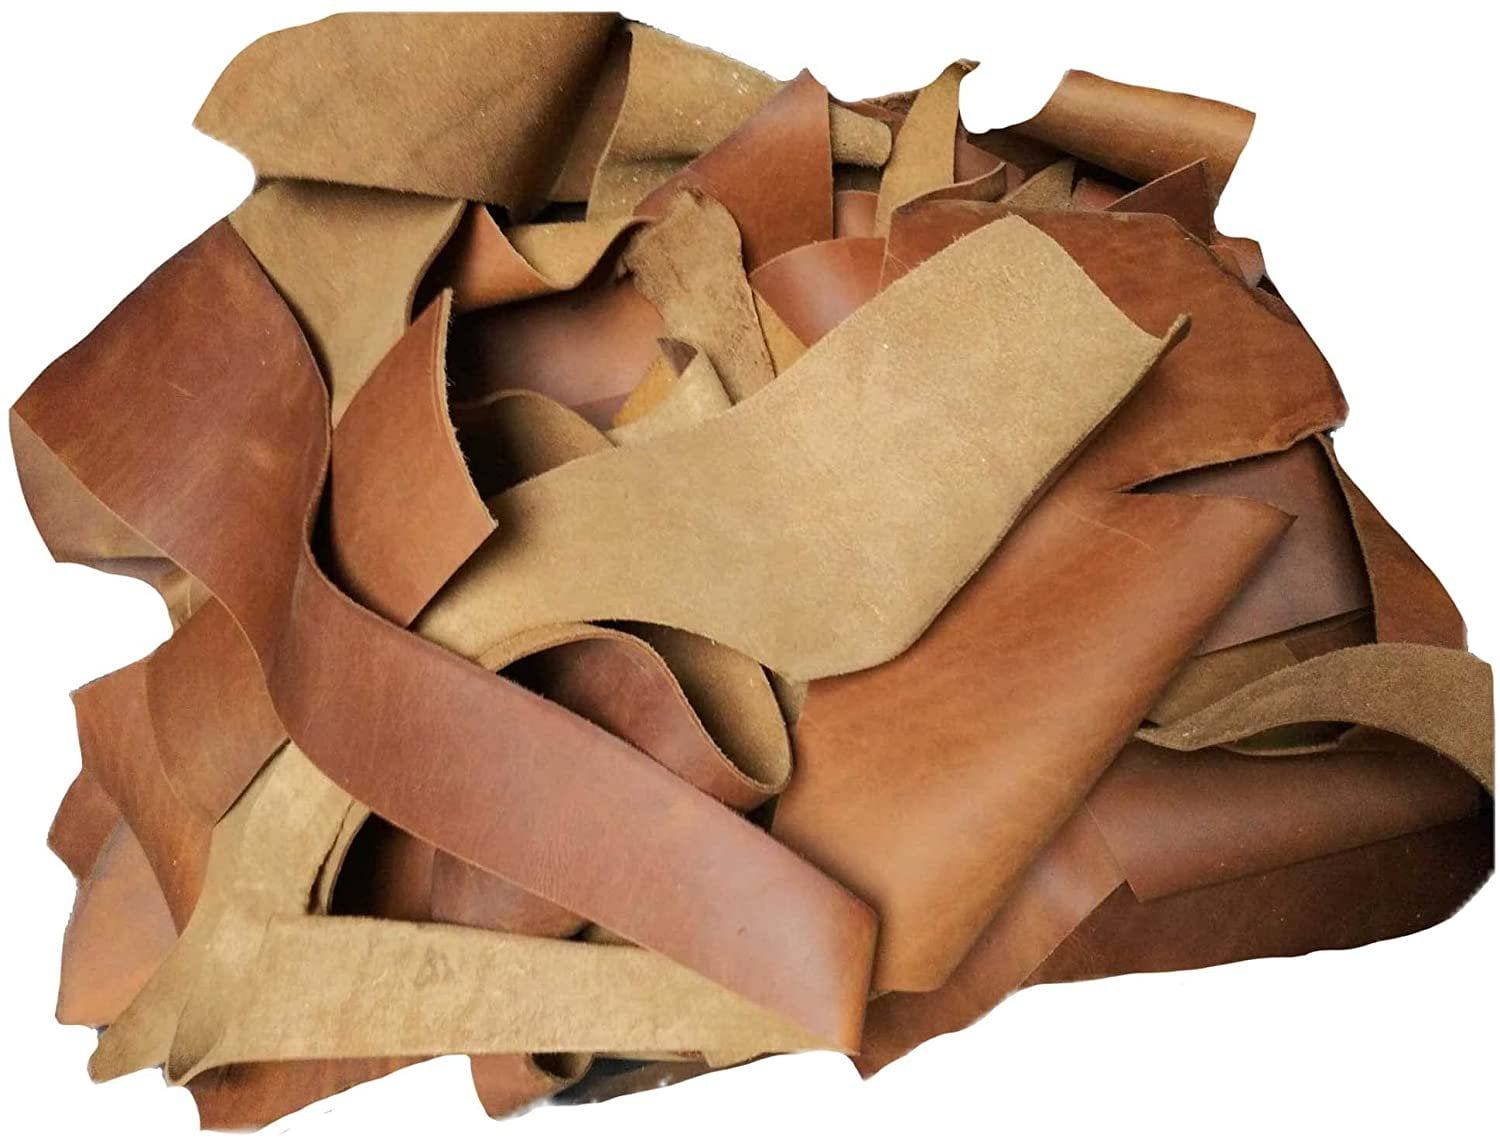 European Leather Work 9-10 oz. 3.6-4mm Oil-Tanned Leather Scraps Size: 1 LB  - Bourbon BrownCowhide Full Grain Leather for Tooling, Accessories,  Jewelry, Crafting, and DIY Projects 